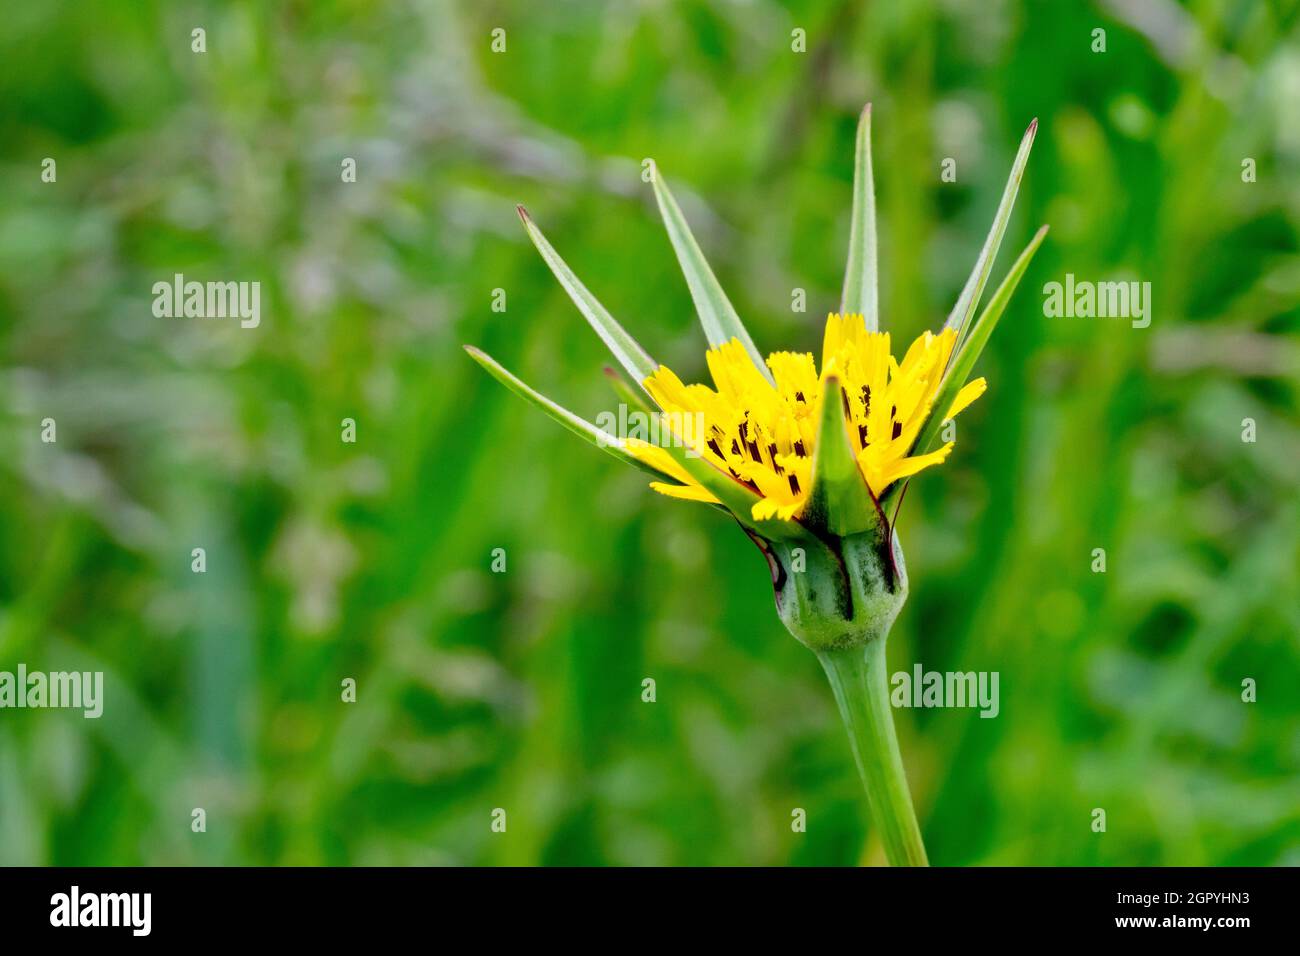 Goat's-beard (tragopogon pratensis), also known as Jack-go-to-bed-at-noon, close up of a single isolated yellow flower. Stock Photo